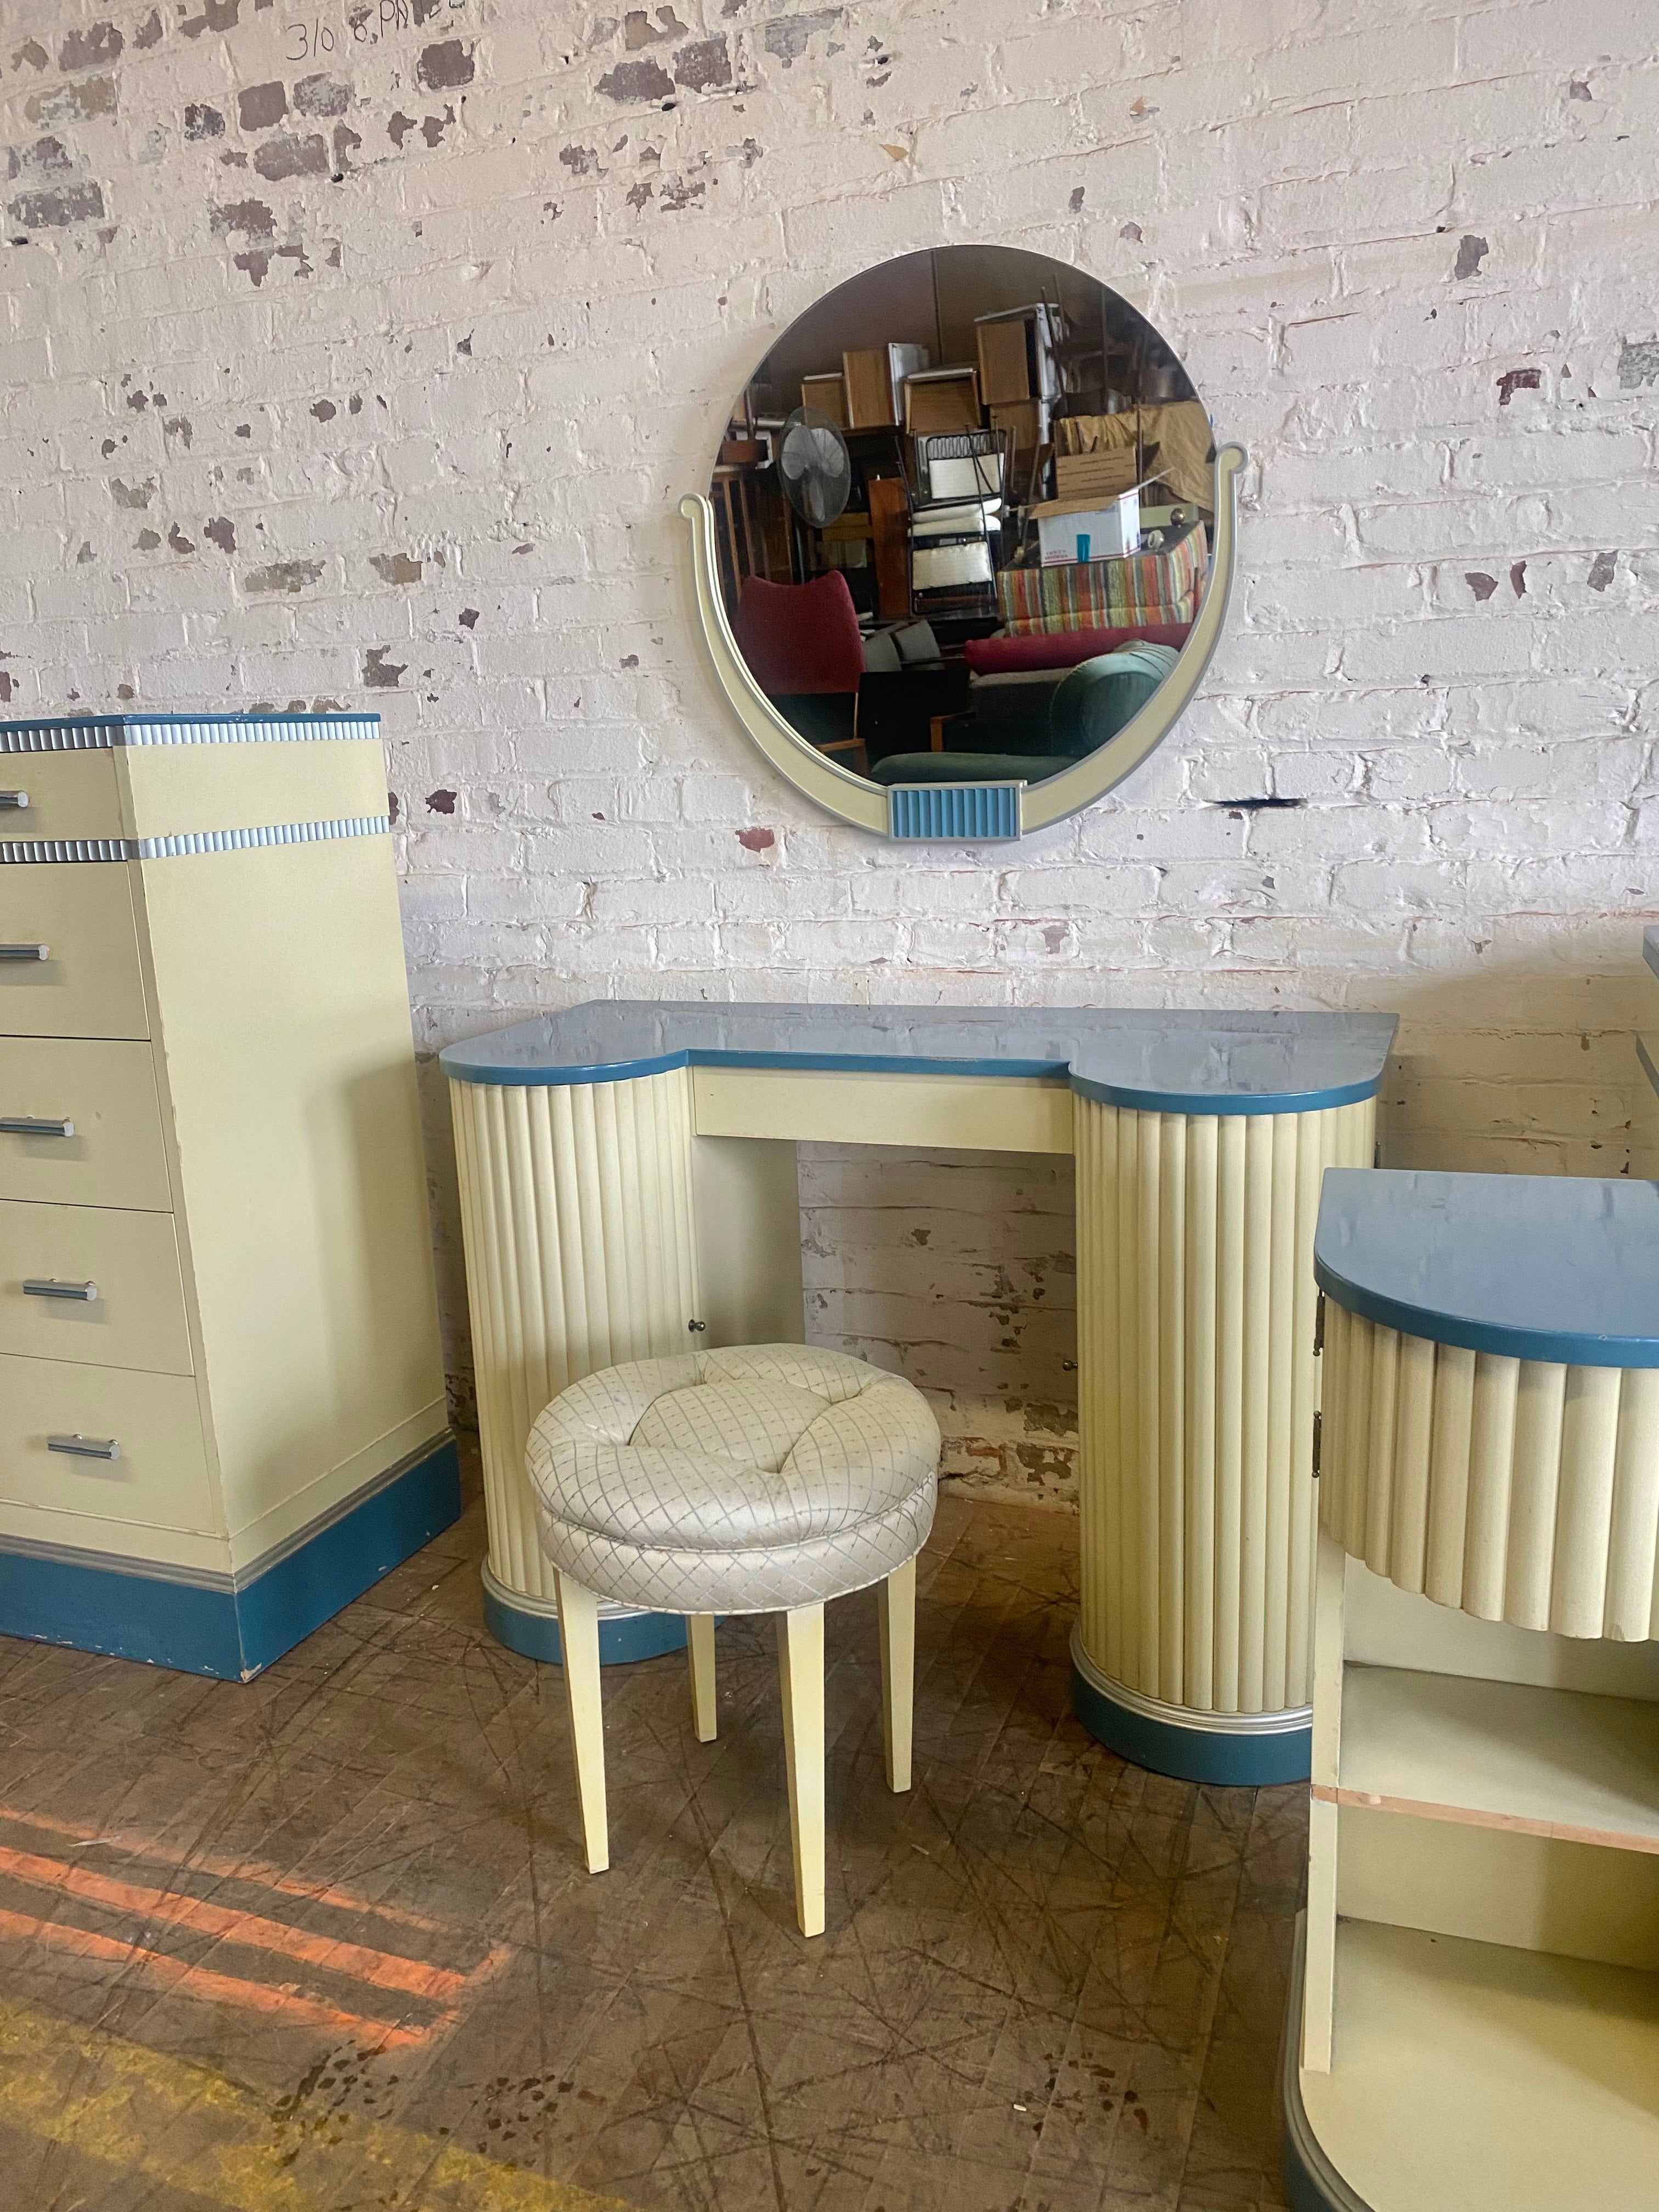 Stunning Art Deco Bedroom Suite manufactured by Kittinger Furniture Co. Buffalo New York. Introduced in 1934, this was they're Doric line. High style Art deco, two-tone cream and blue lacquer. Very rare and unusual to find complete set,Set includes,